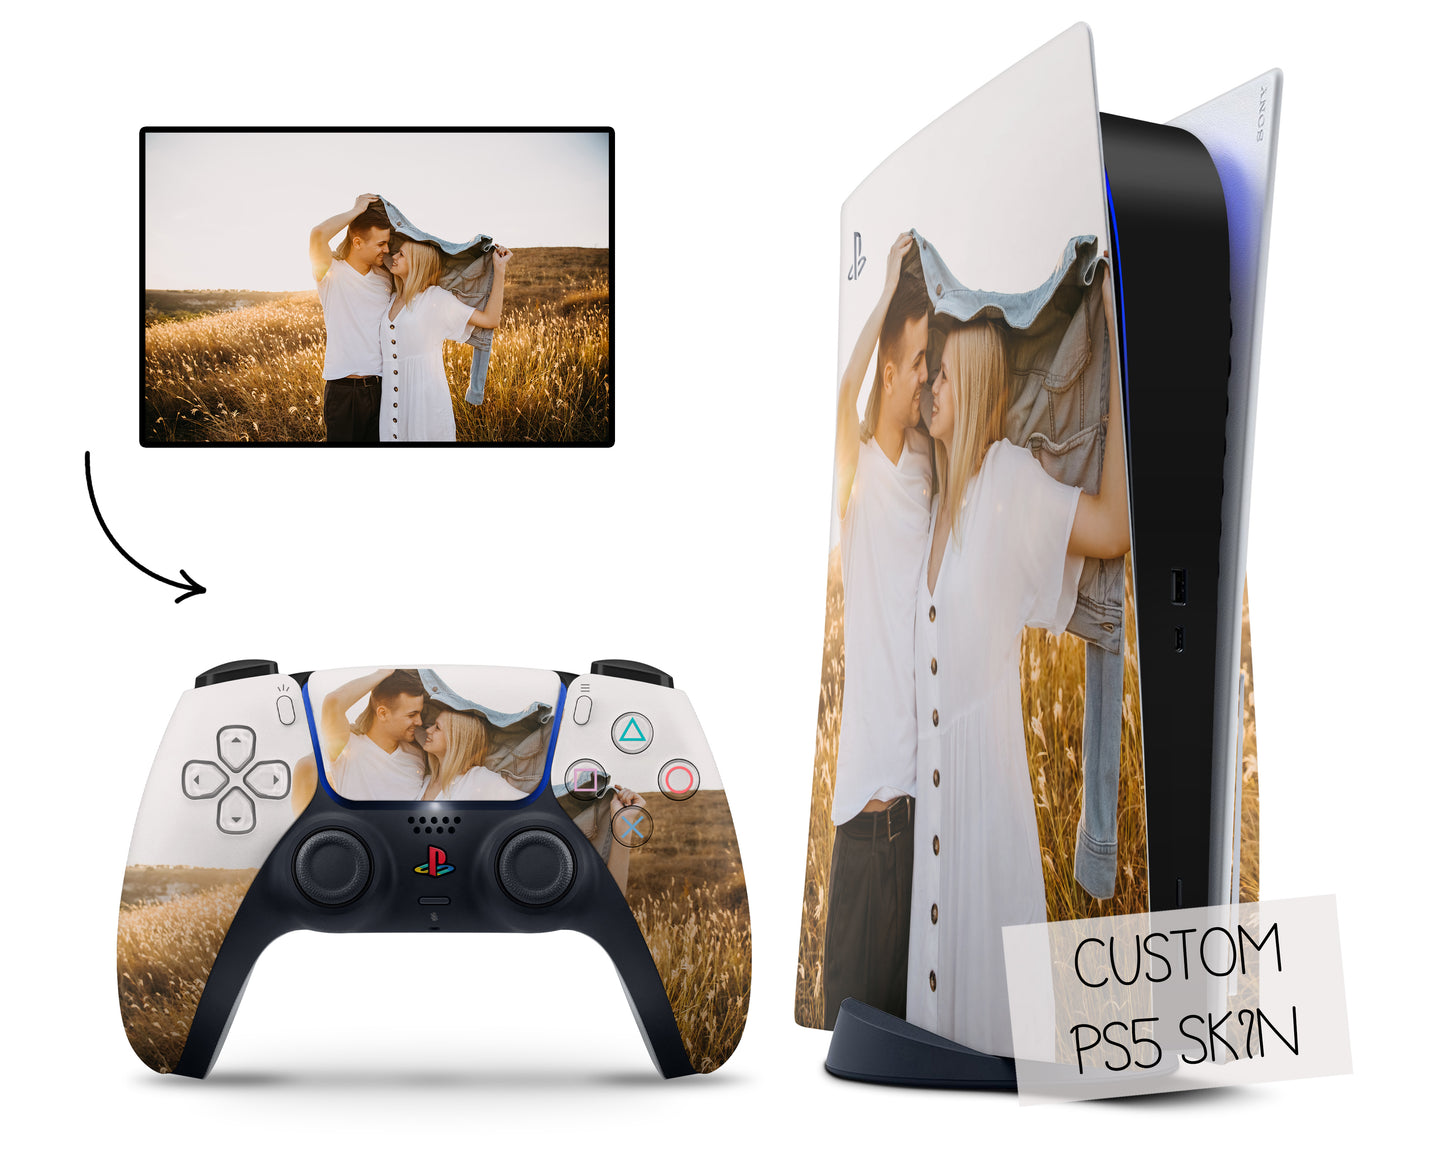 Create Your Own PS5 Skin